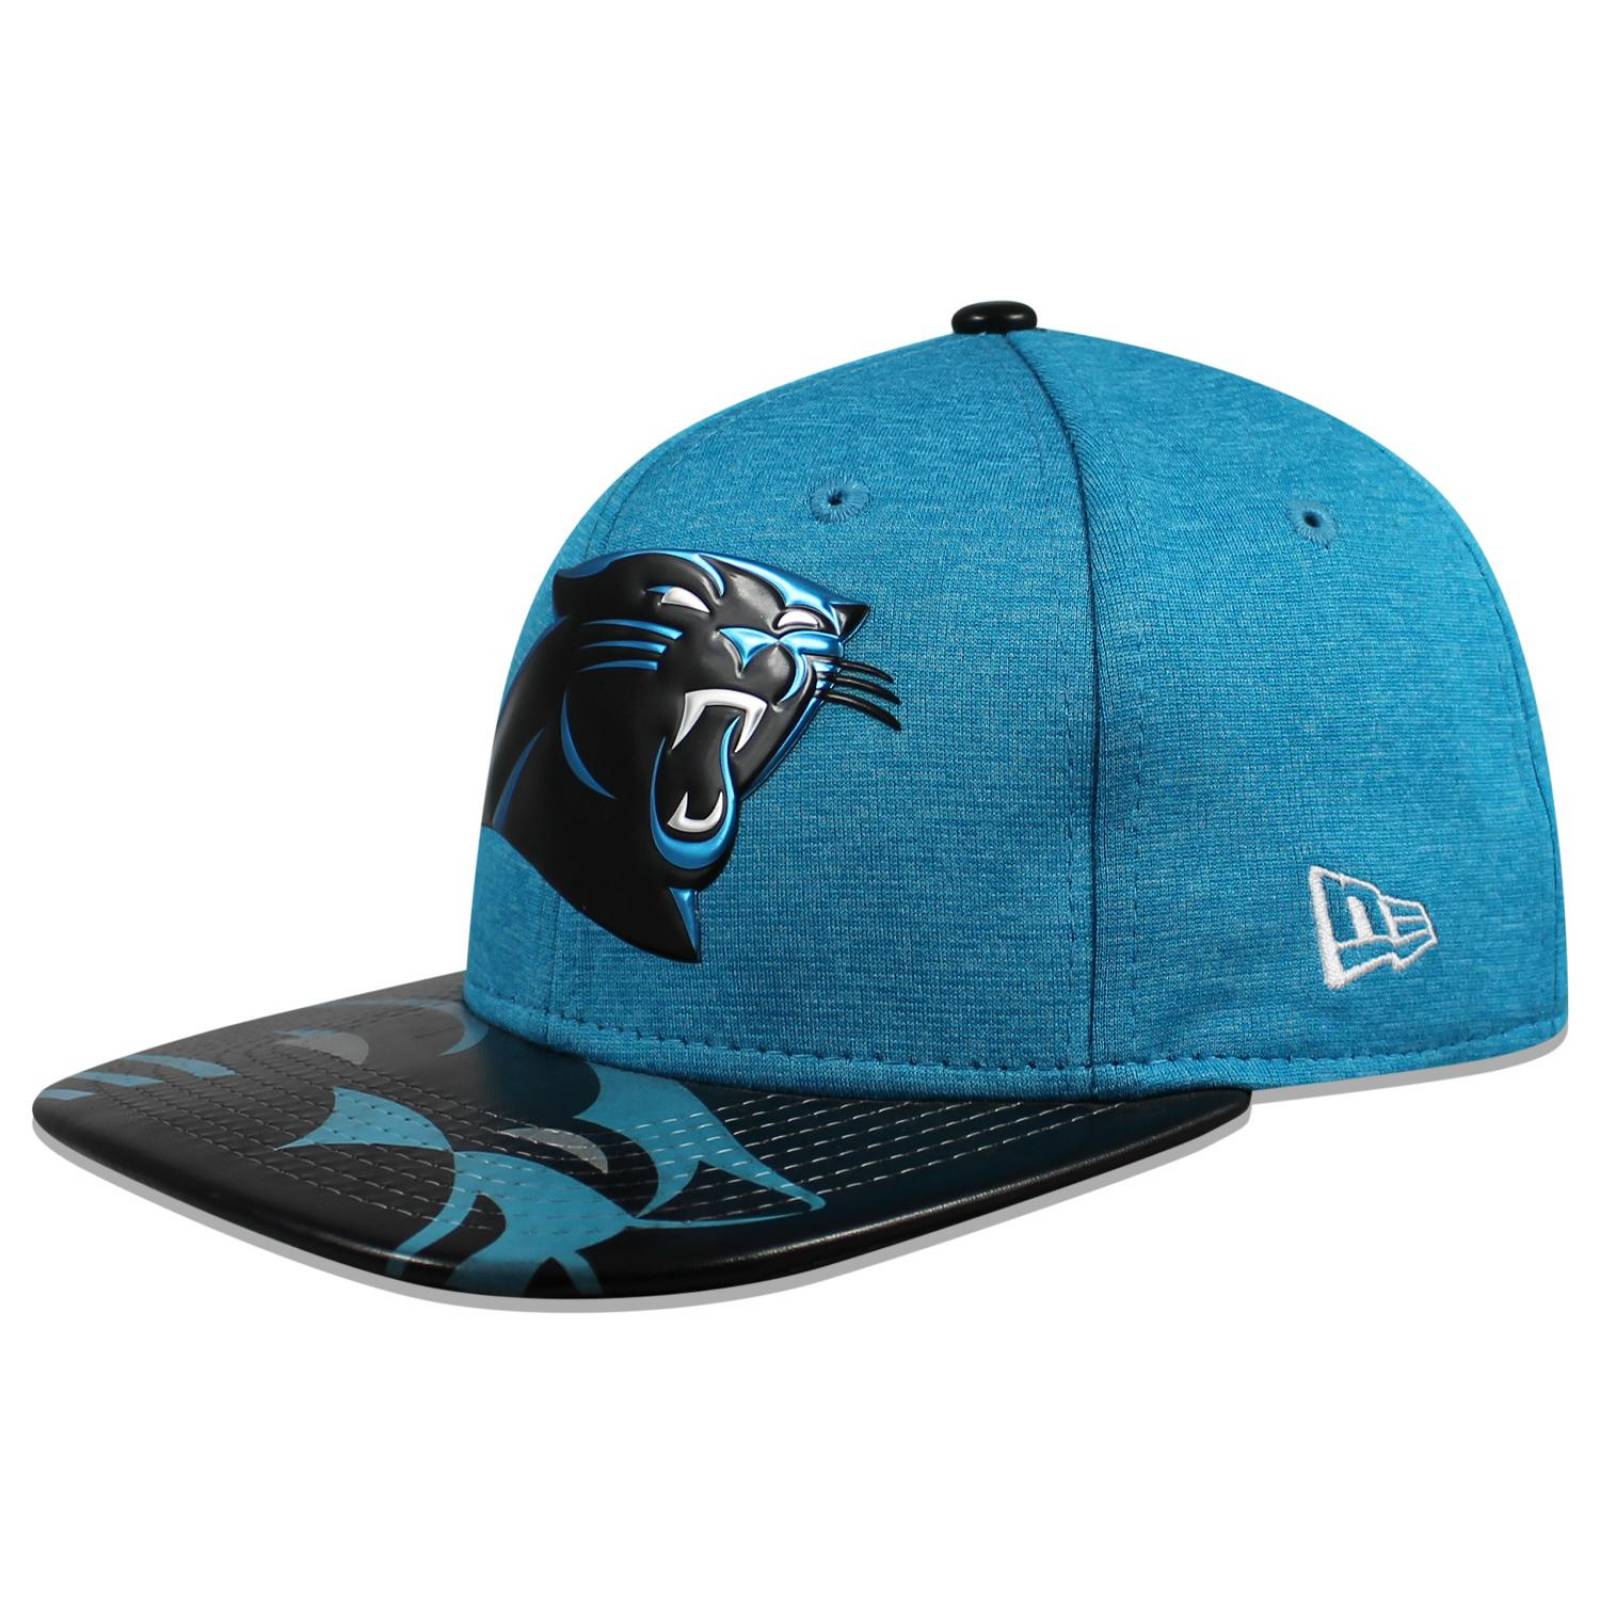 Gorra New Era 9 Fifty NFL Panthers On Stage Azul 